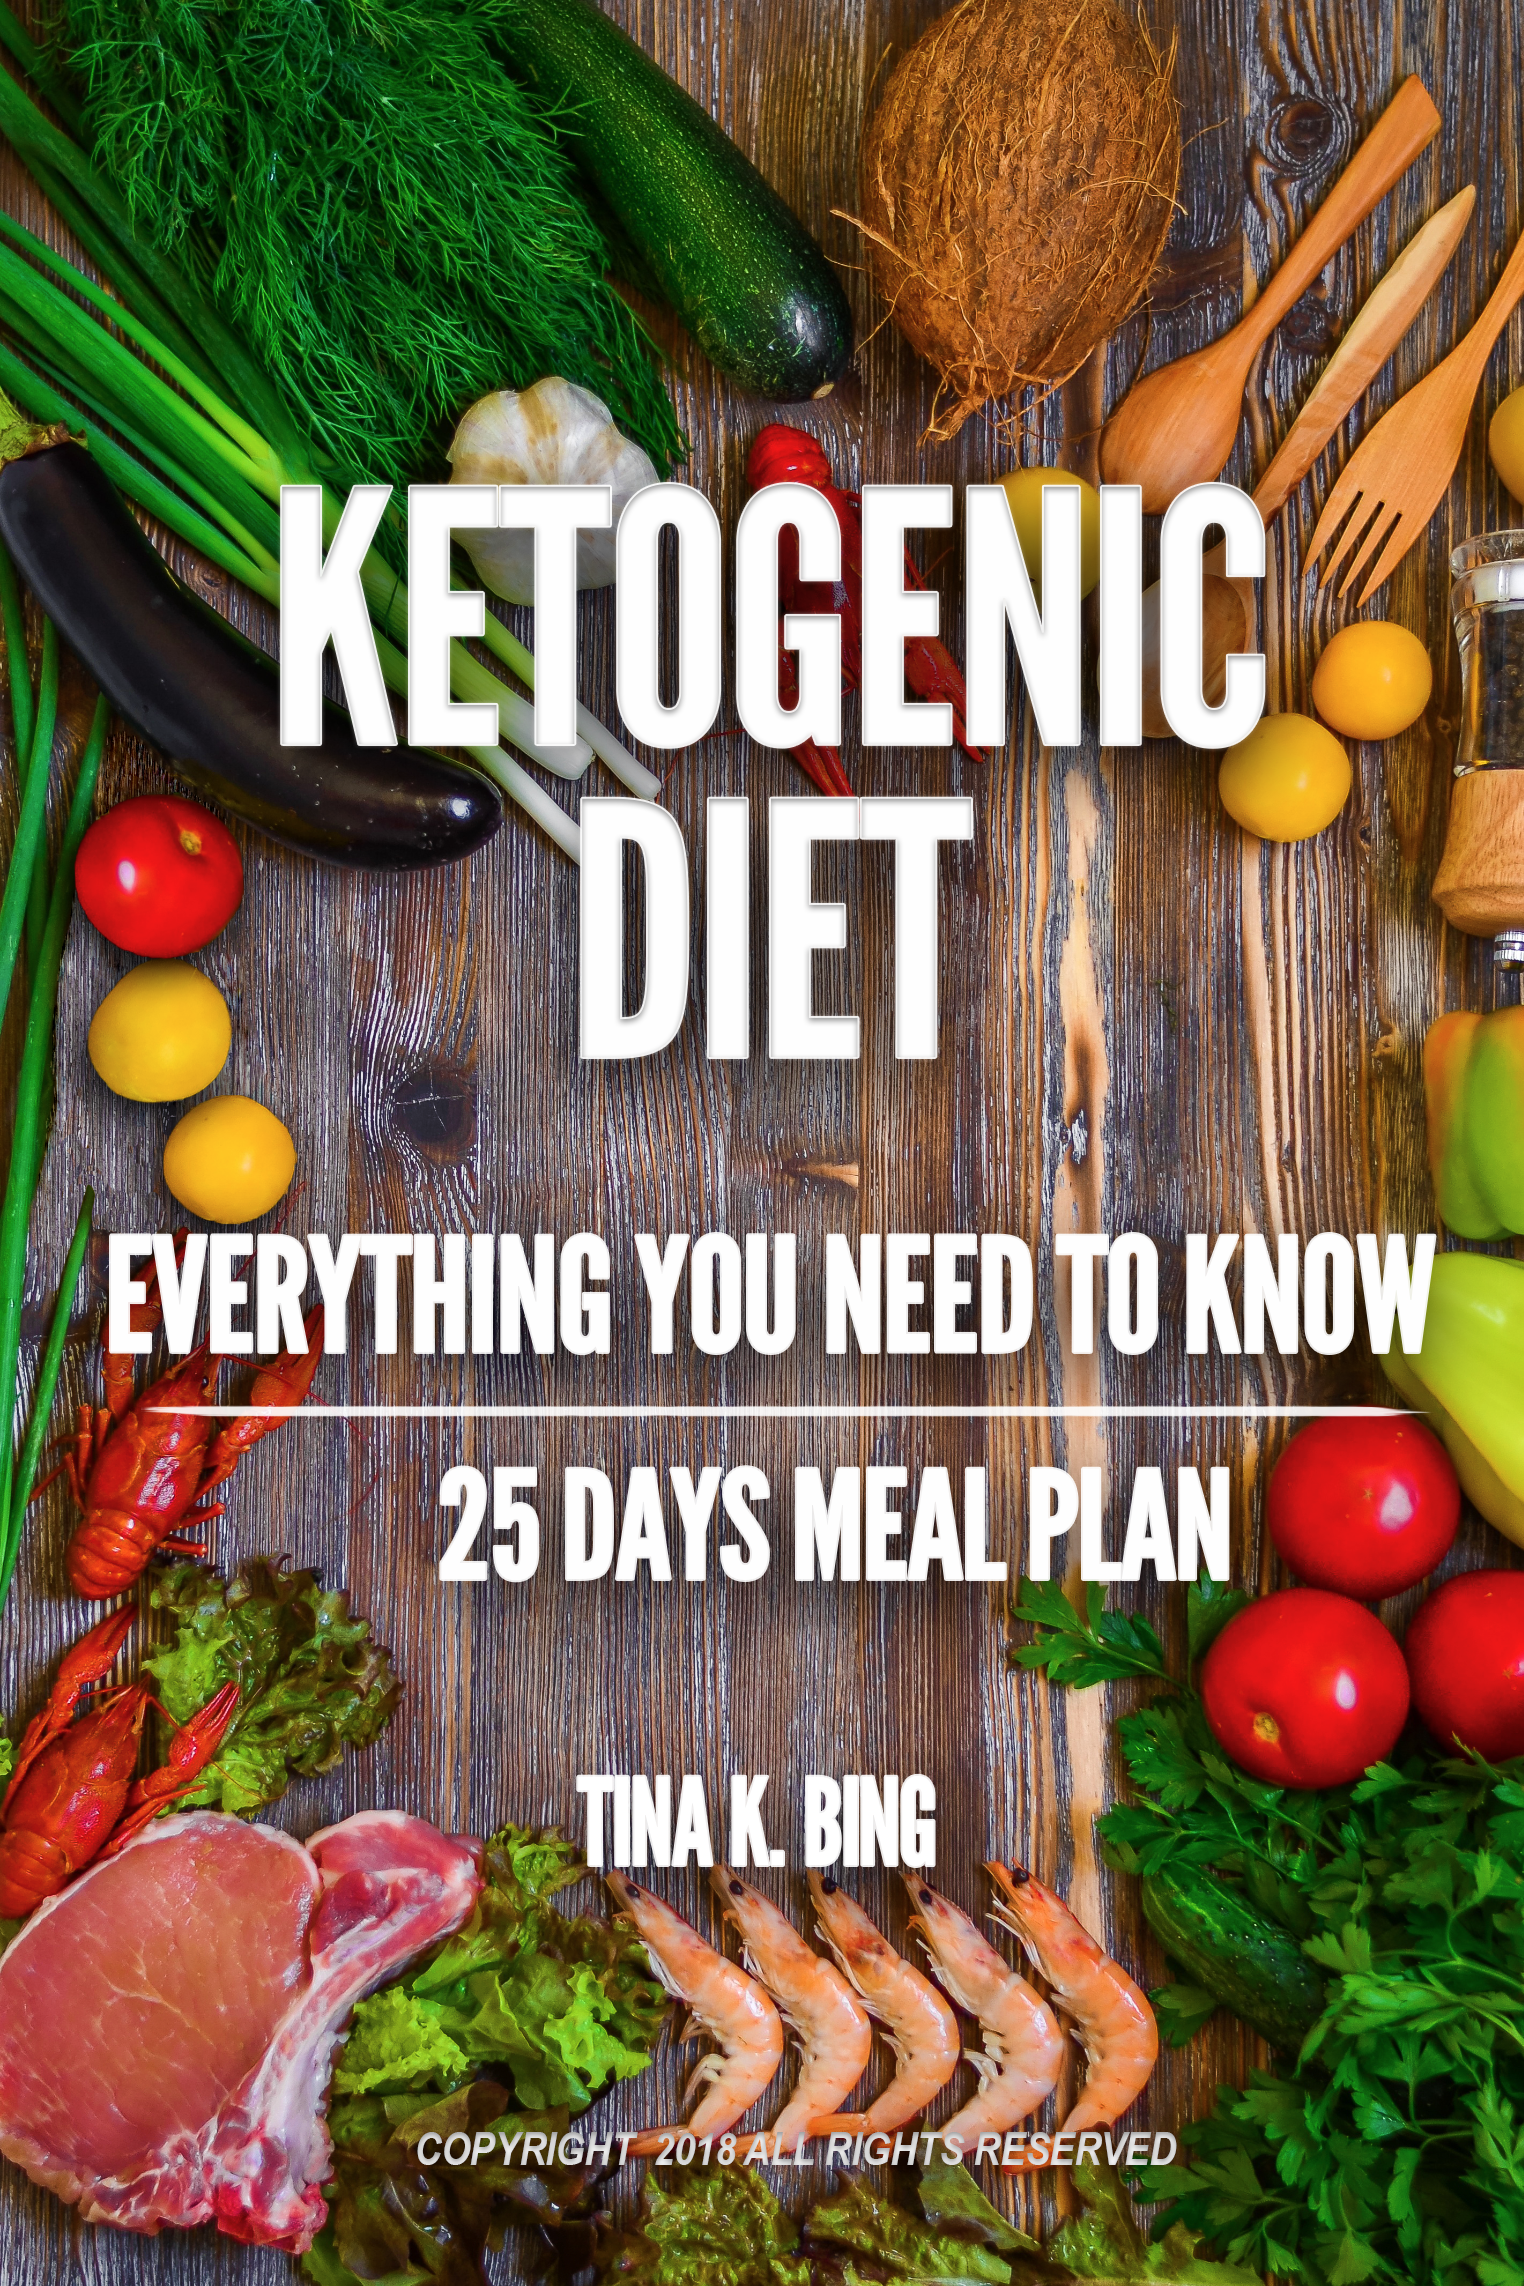 FREE: Ketogenic diet: Everything You Need to Know by Tina K. Bing